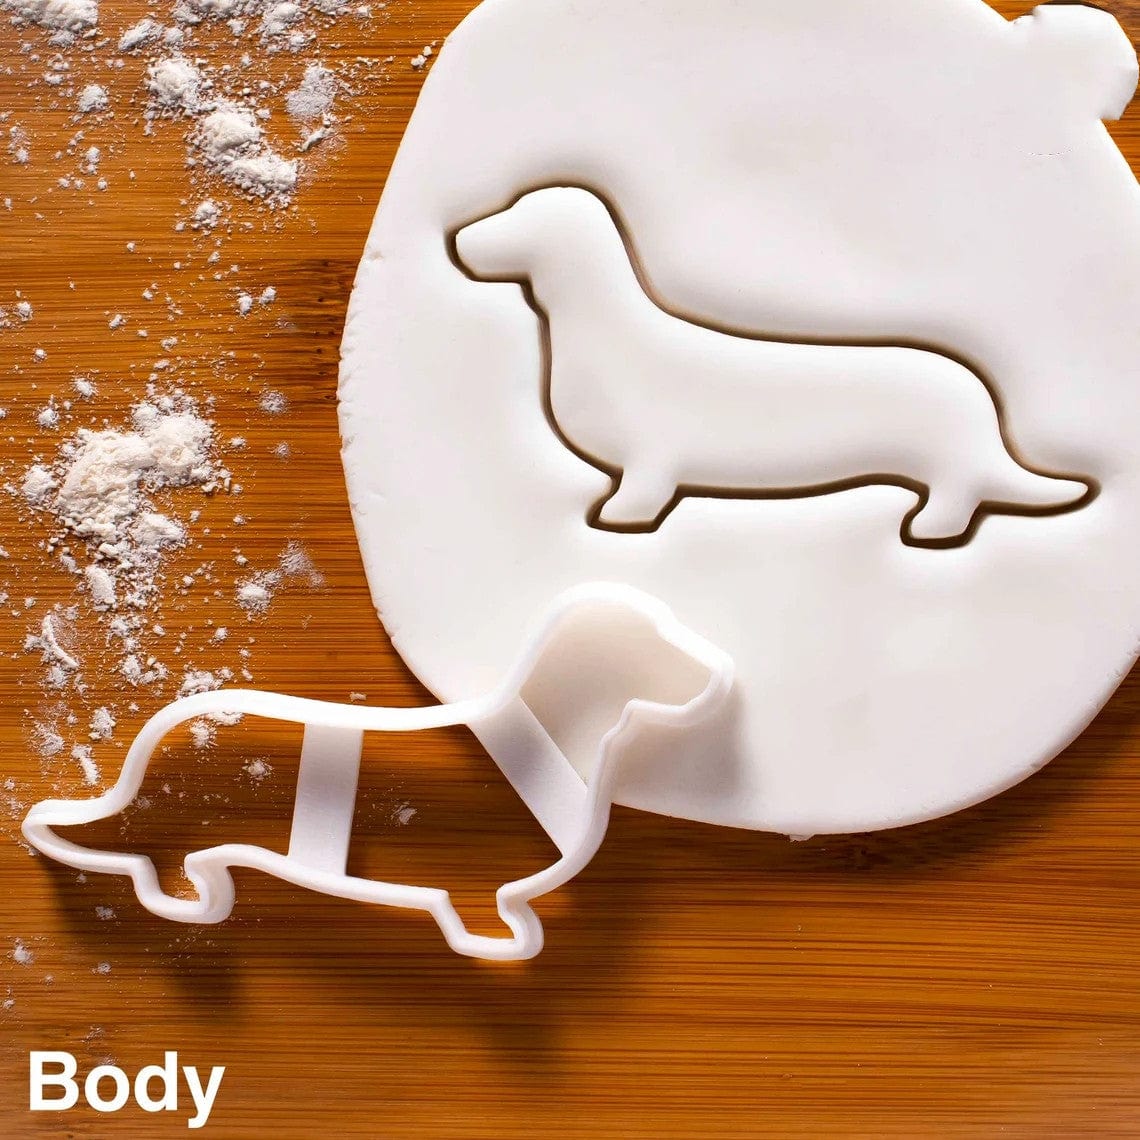 Dachshund Cookie Cutters Body The Doxie World